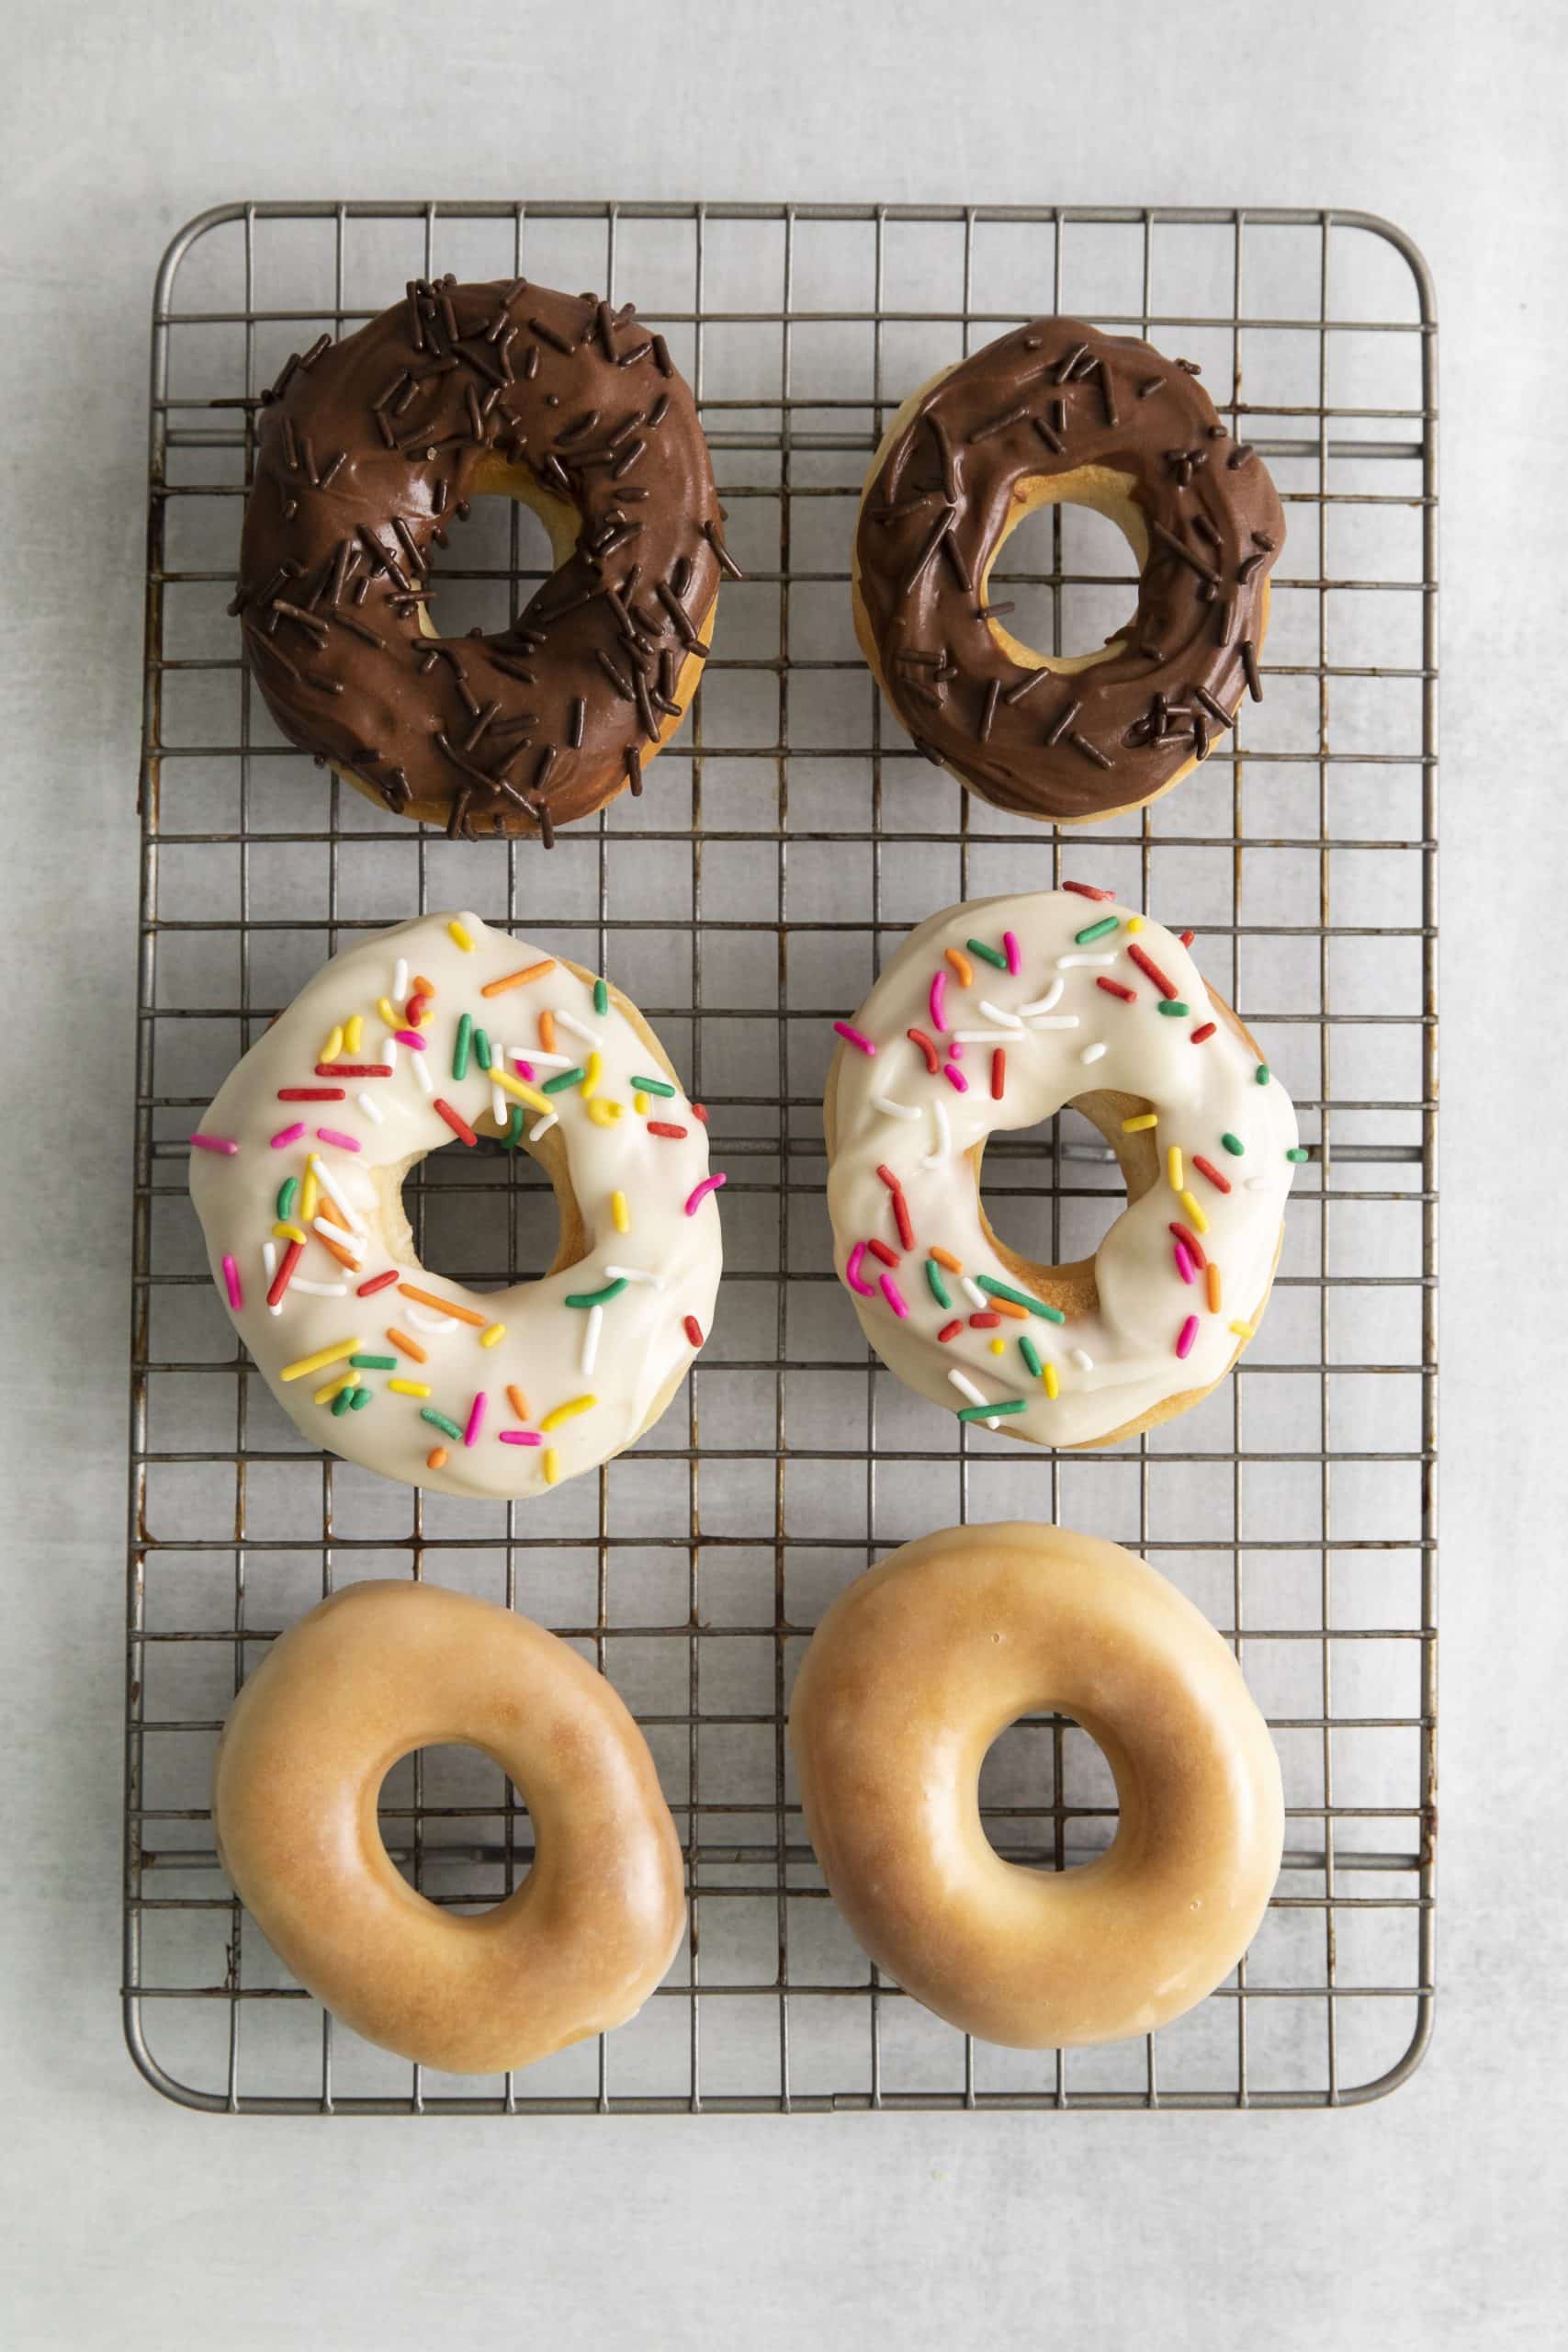 Top view photo of glazed and frosted Air Fryer Donuts on a cooling rack. Two are glazed, two have vanilla frosting with sprinkles, and two have chocolate frosting with chocolate sprinkles.